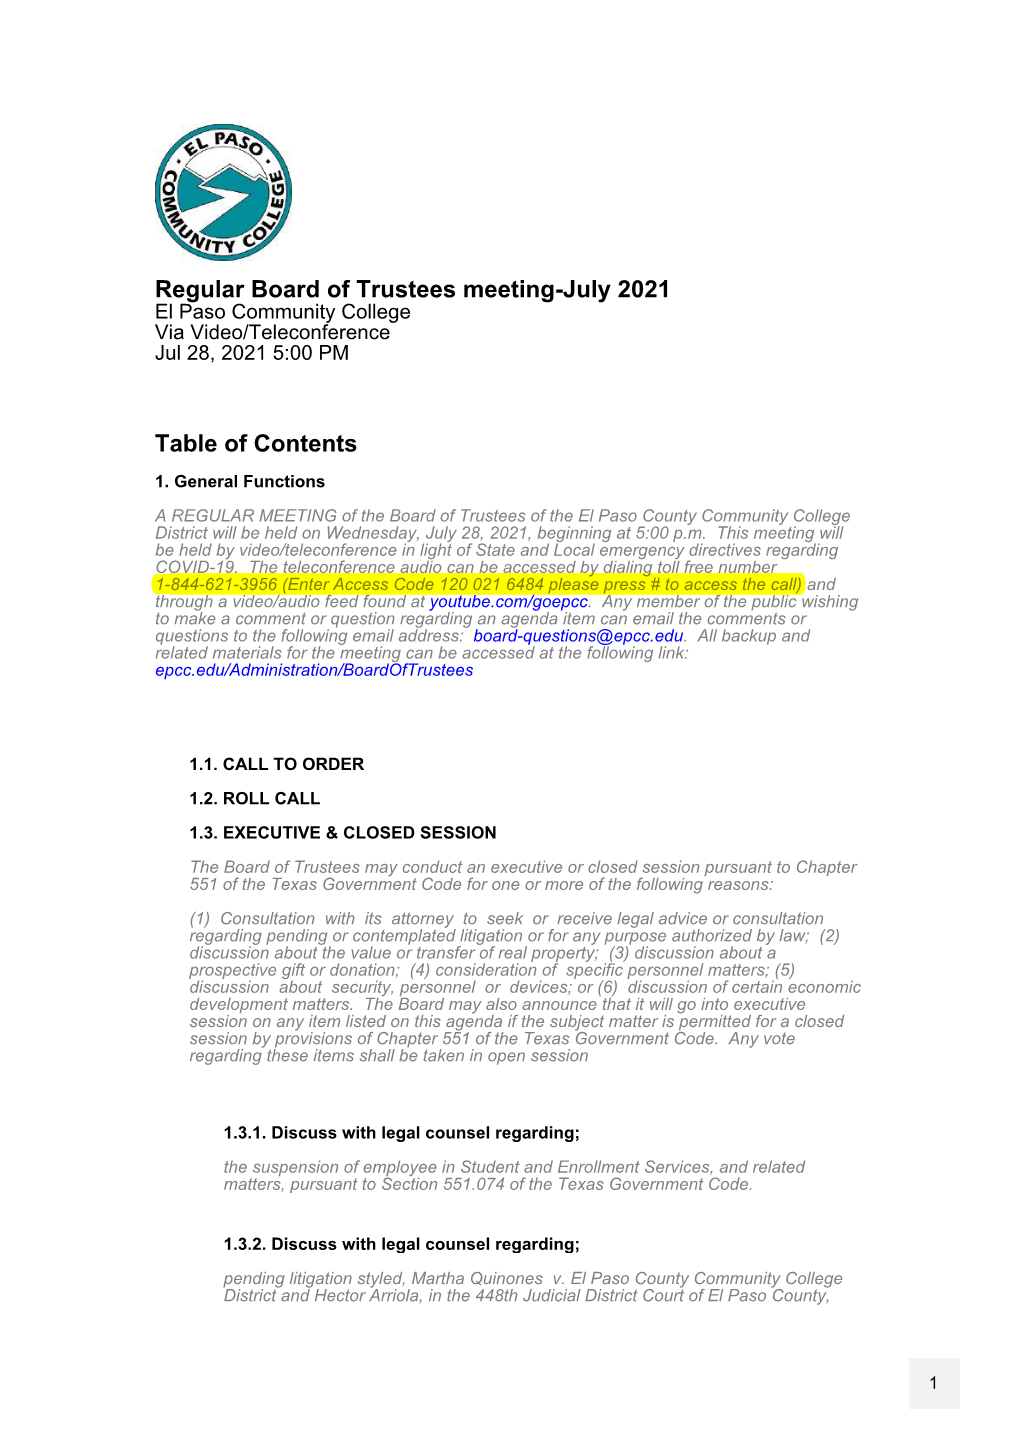 Regular Board of Trustees Meeting-July 2021 Table of Contents